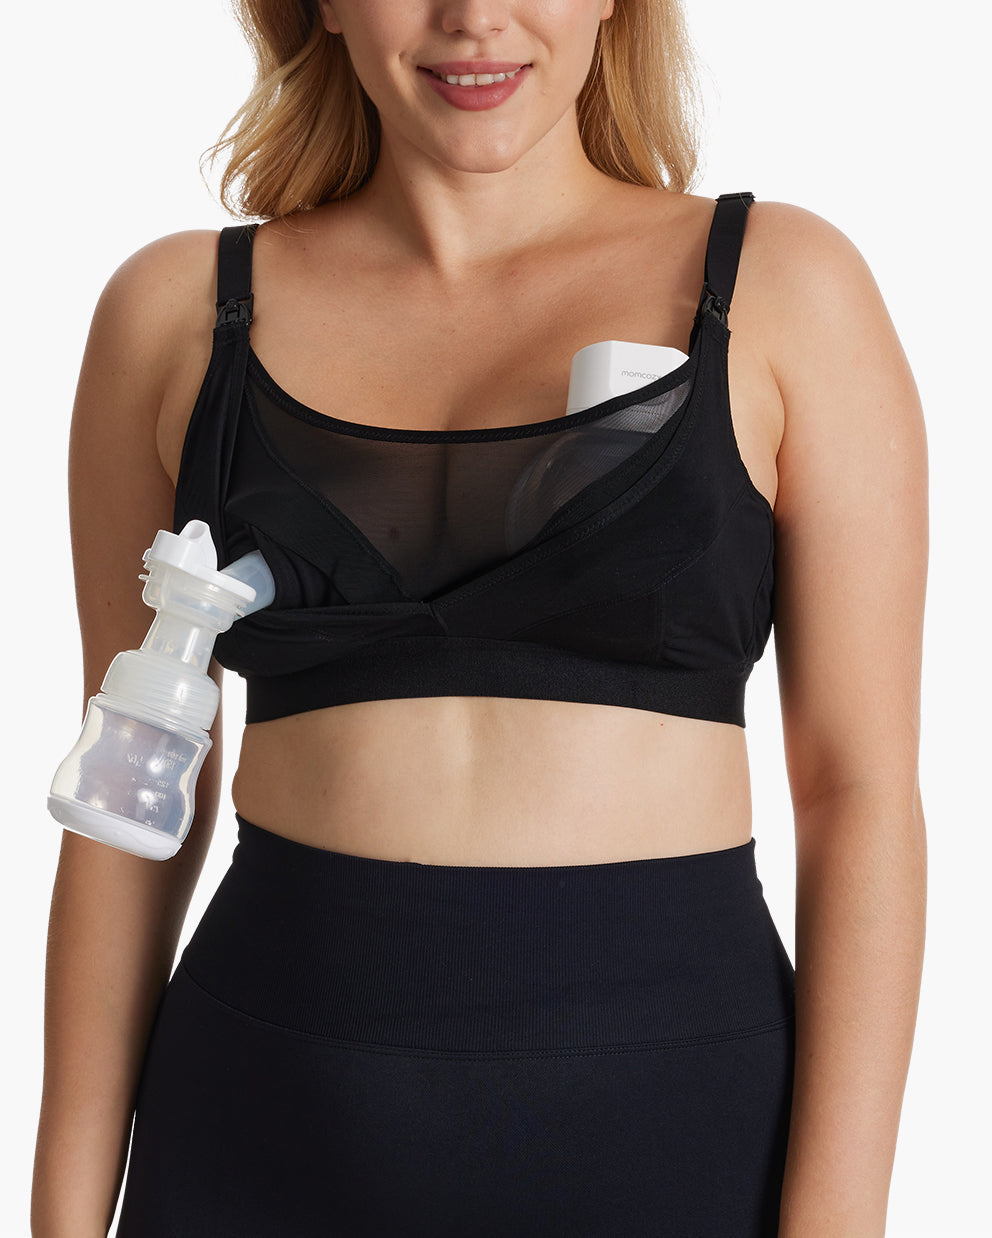 Woman demonstrating the functionality of the Momcozy Bamboo Ultra-Soft & Cool Breeze Pumping & Nursing Bra (HF018) with a wearable breast pump.